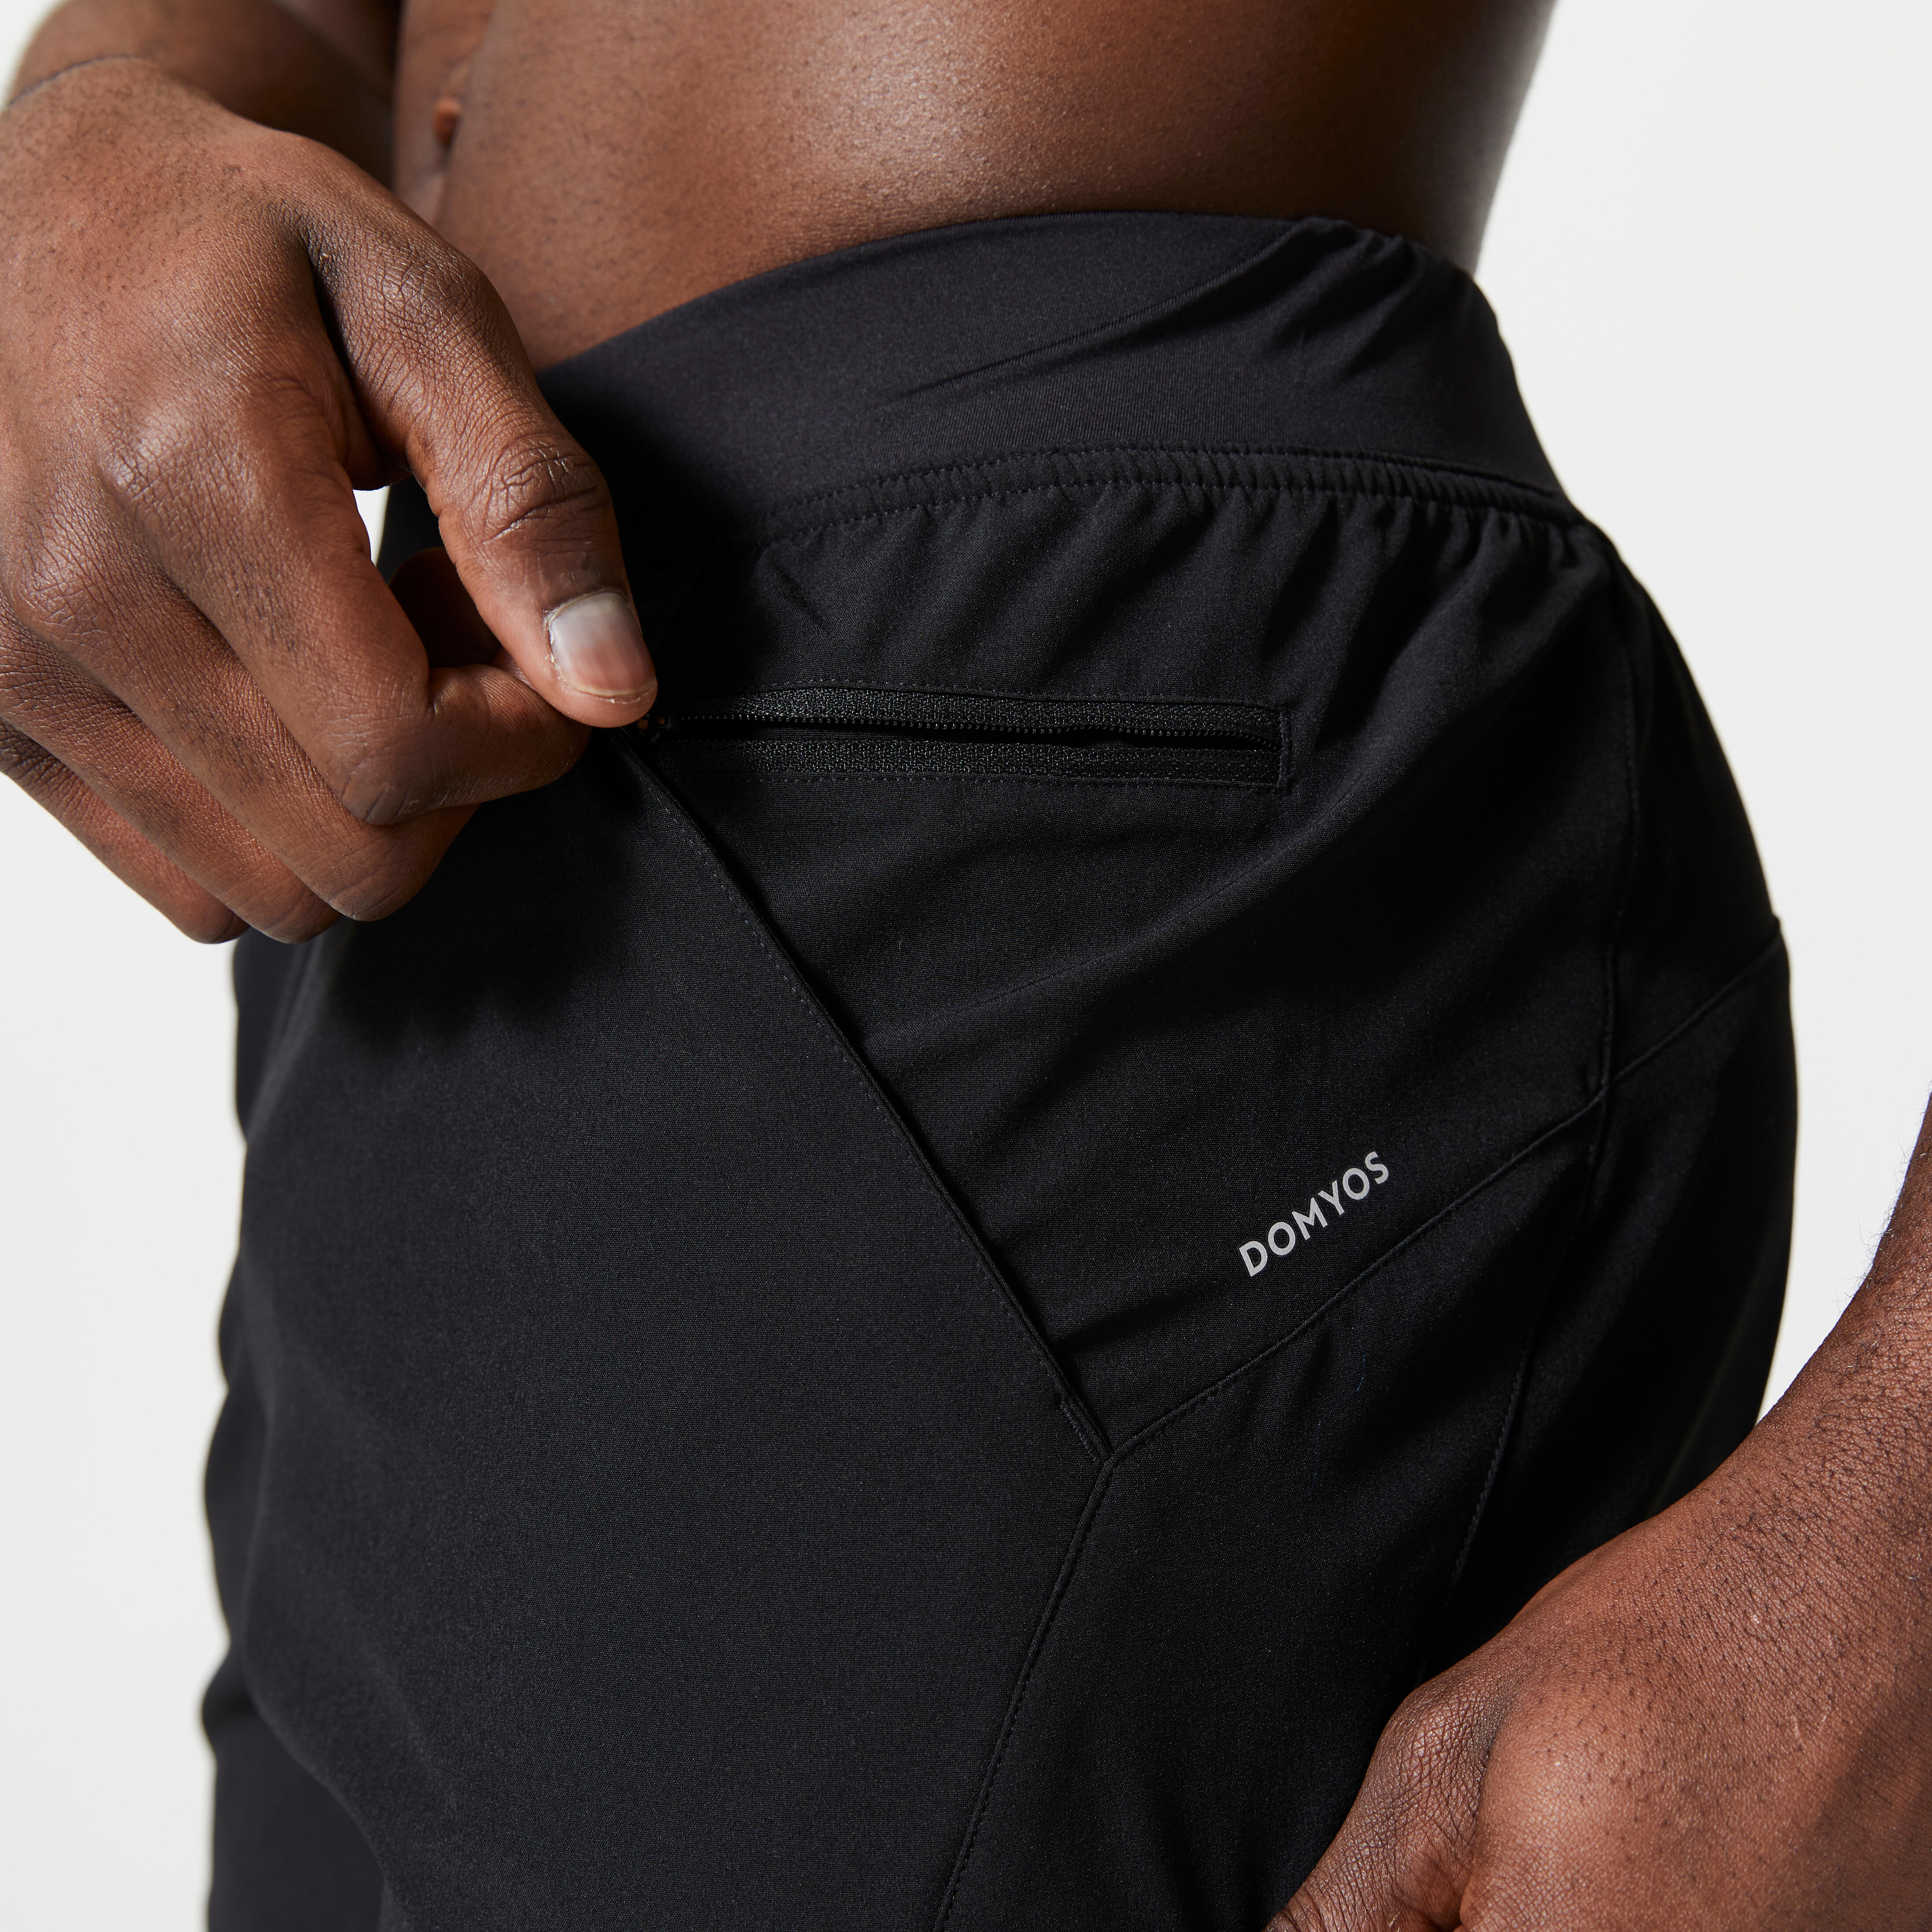 Men's Drawstring Waist 2 in 1 Sports Shorts Workout Running Shorts with Phone  Pocket 